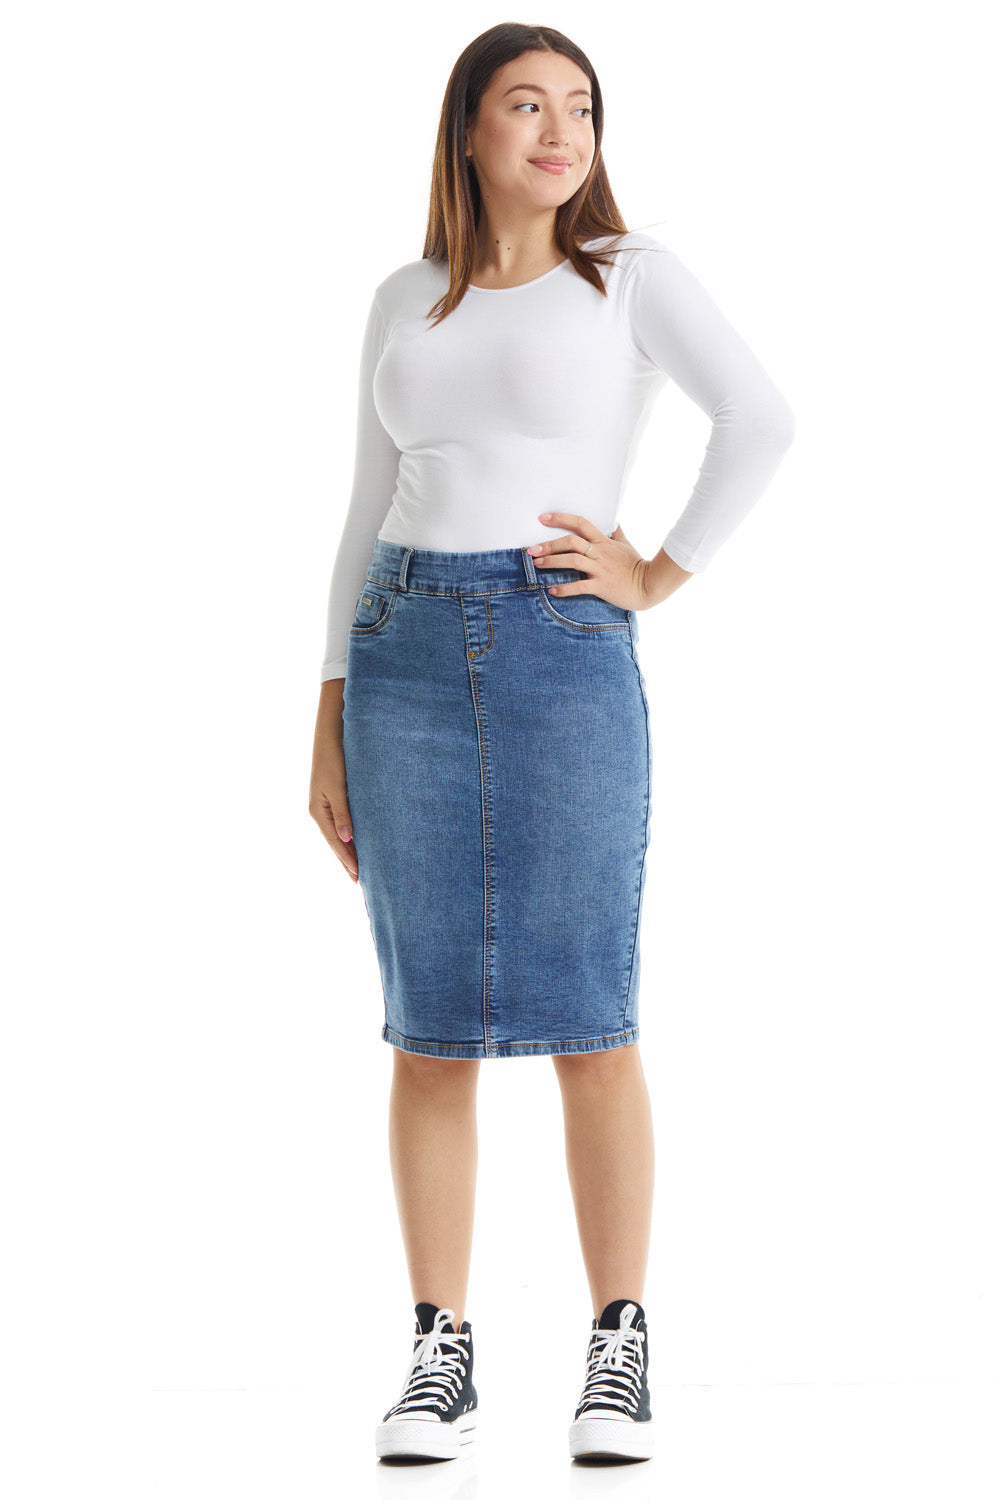 blue Below the knee tight pencil jean skirt with faux pockets